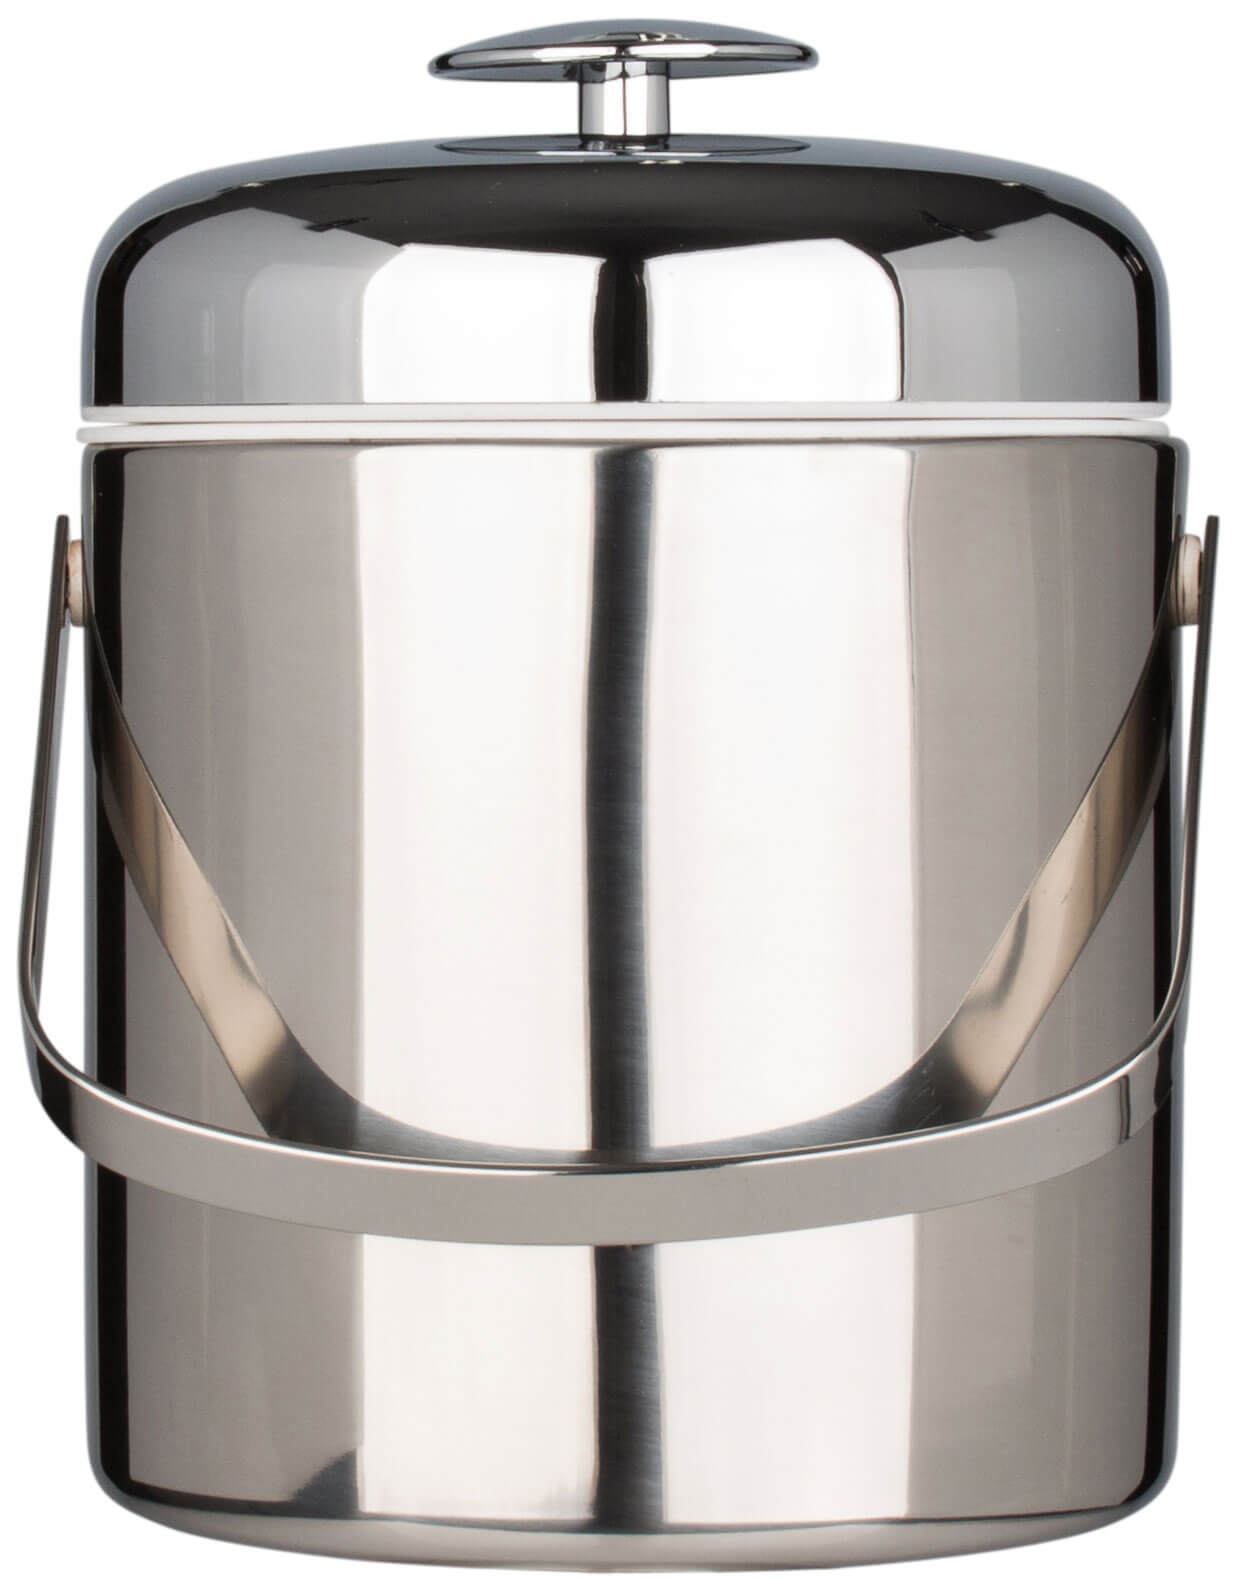 Ice bucket platic PP, silver-colored with tongs - 1,3l